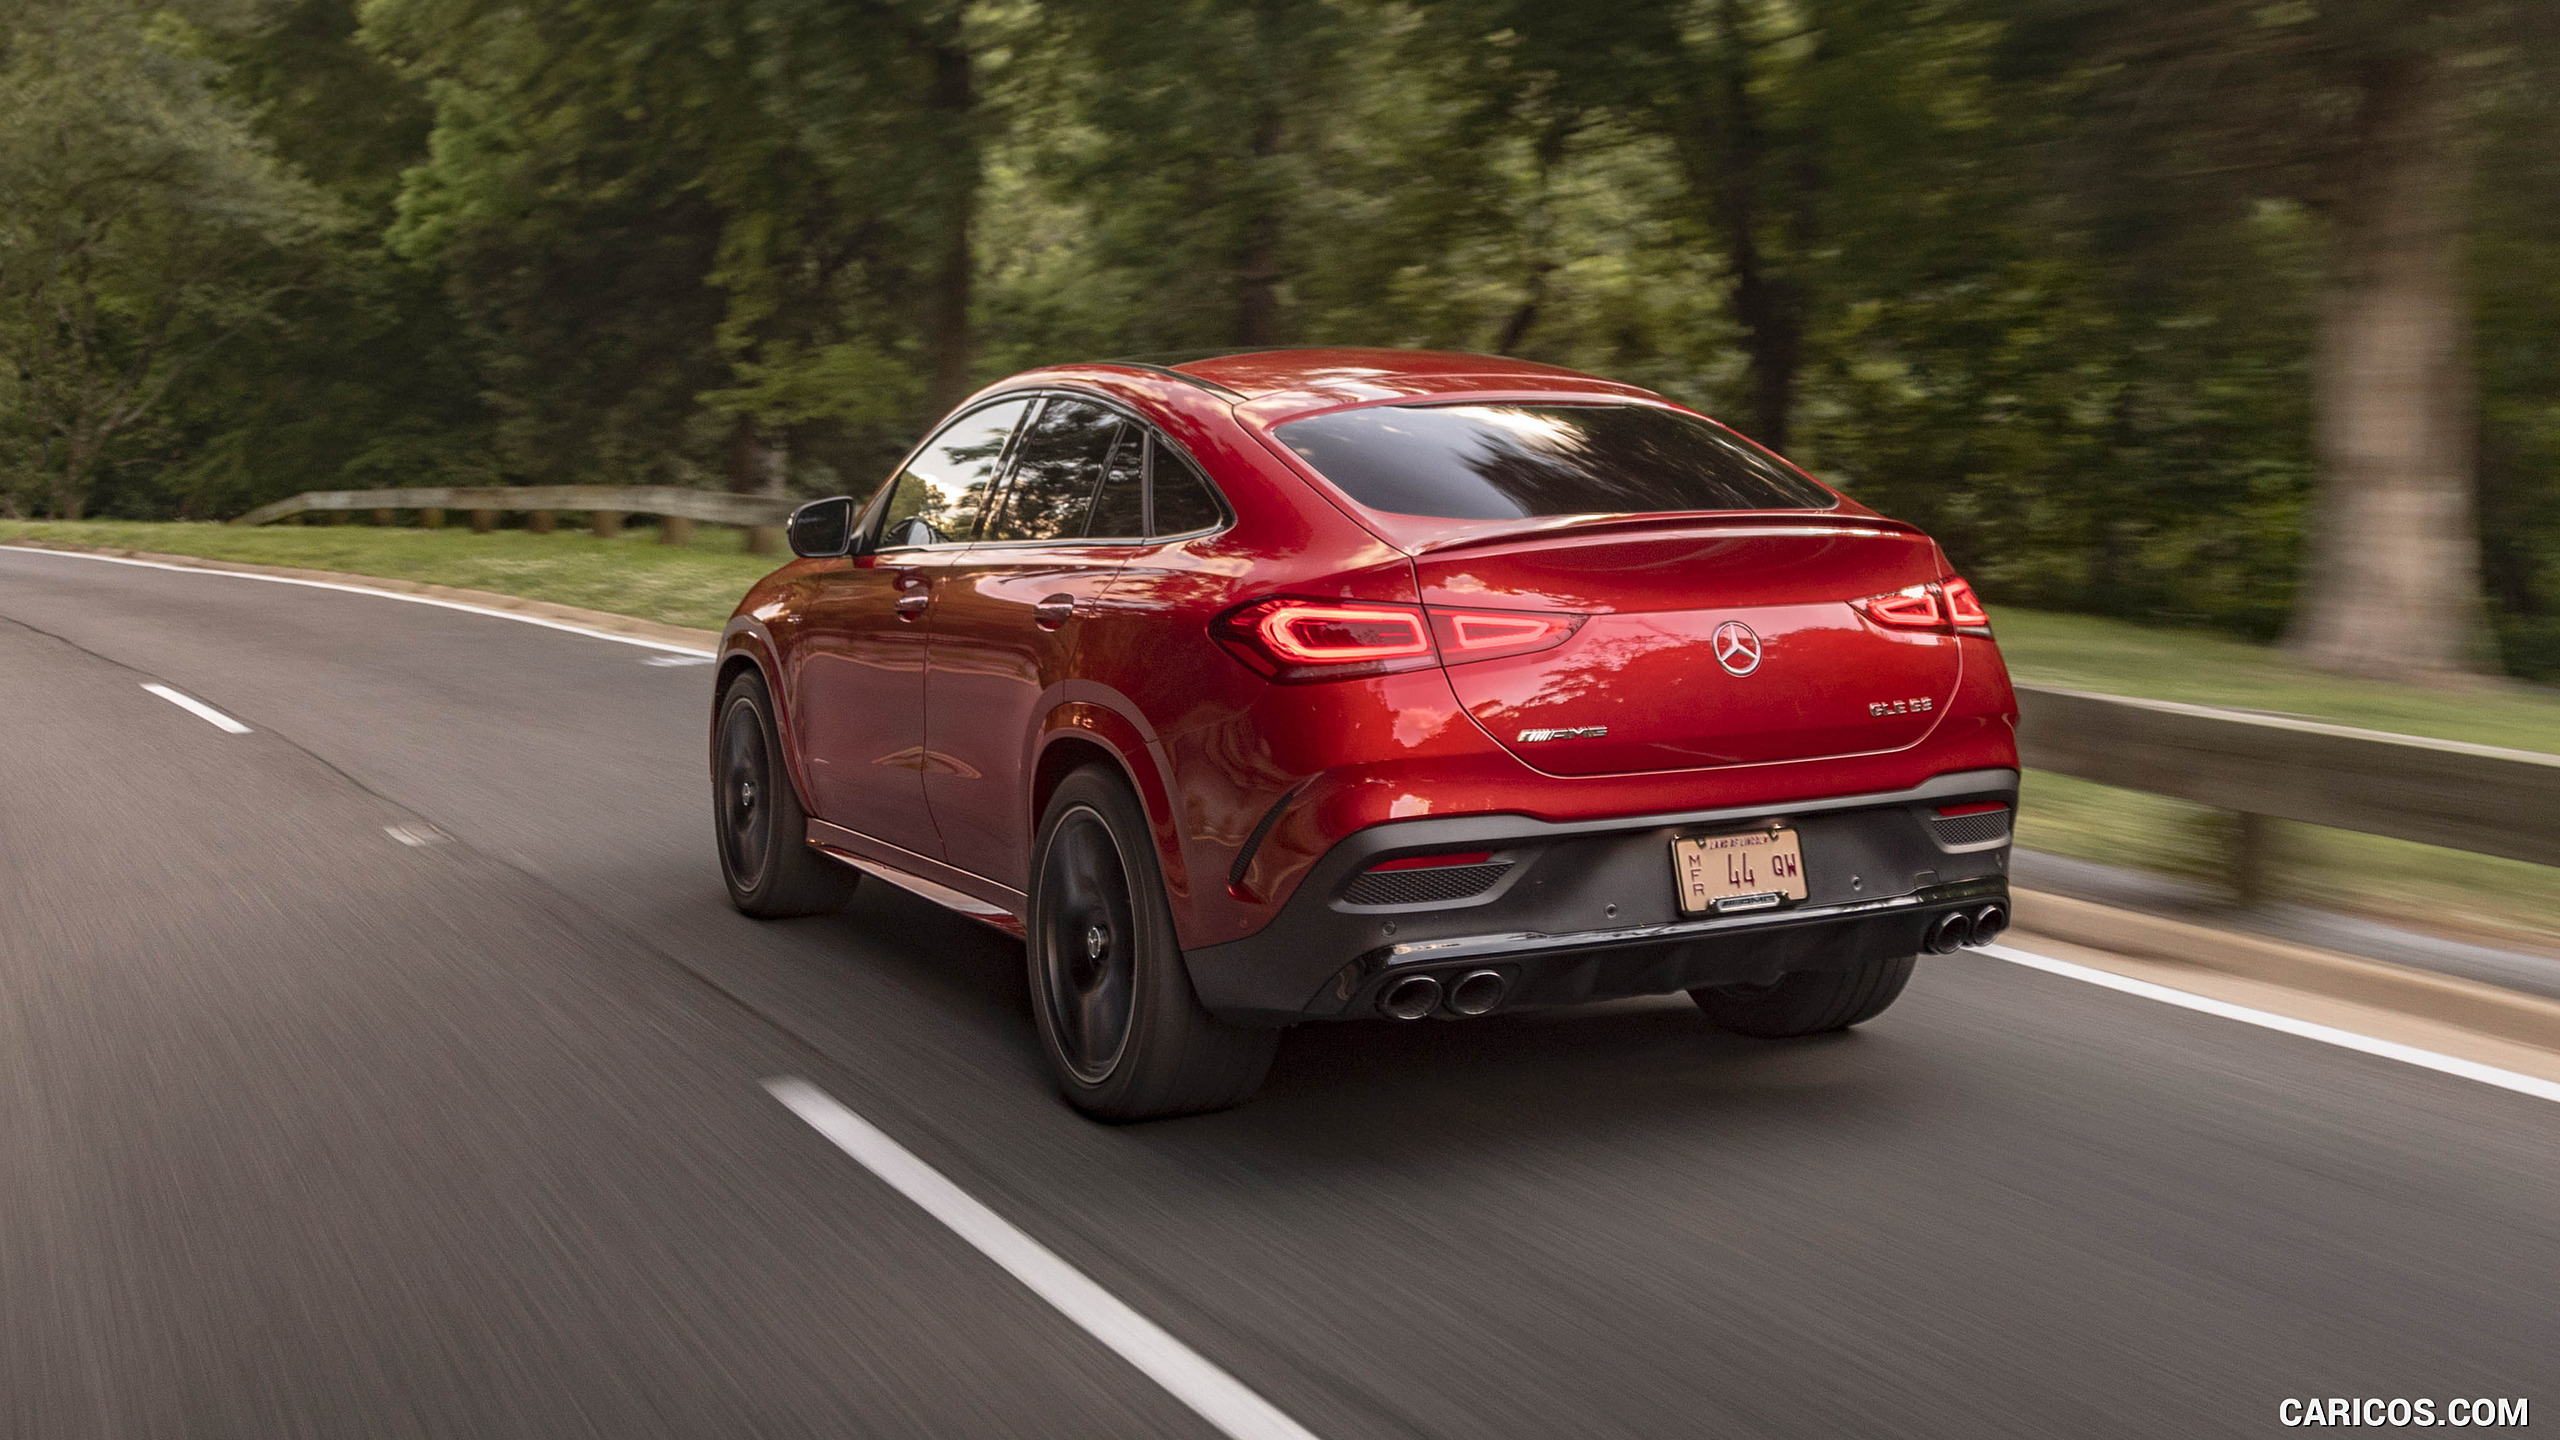 2021 Mercedes-AMG GLE 53 Coupe - Rear Three-Quarter, #93 of 178